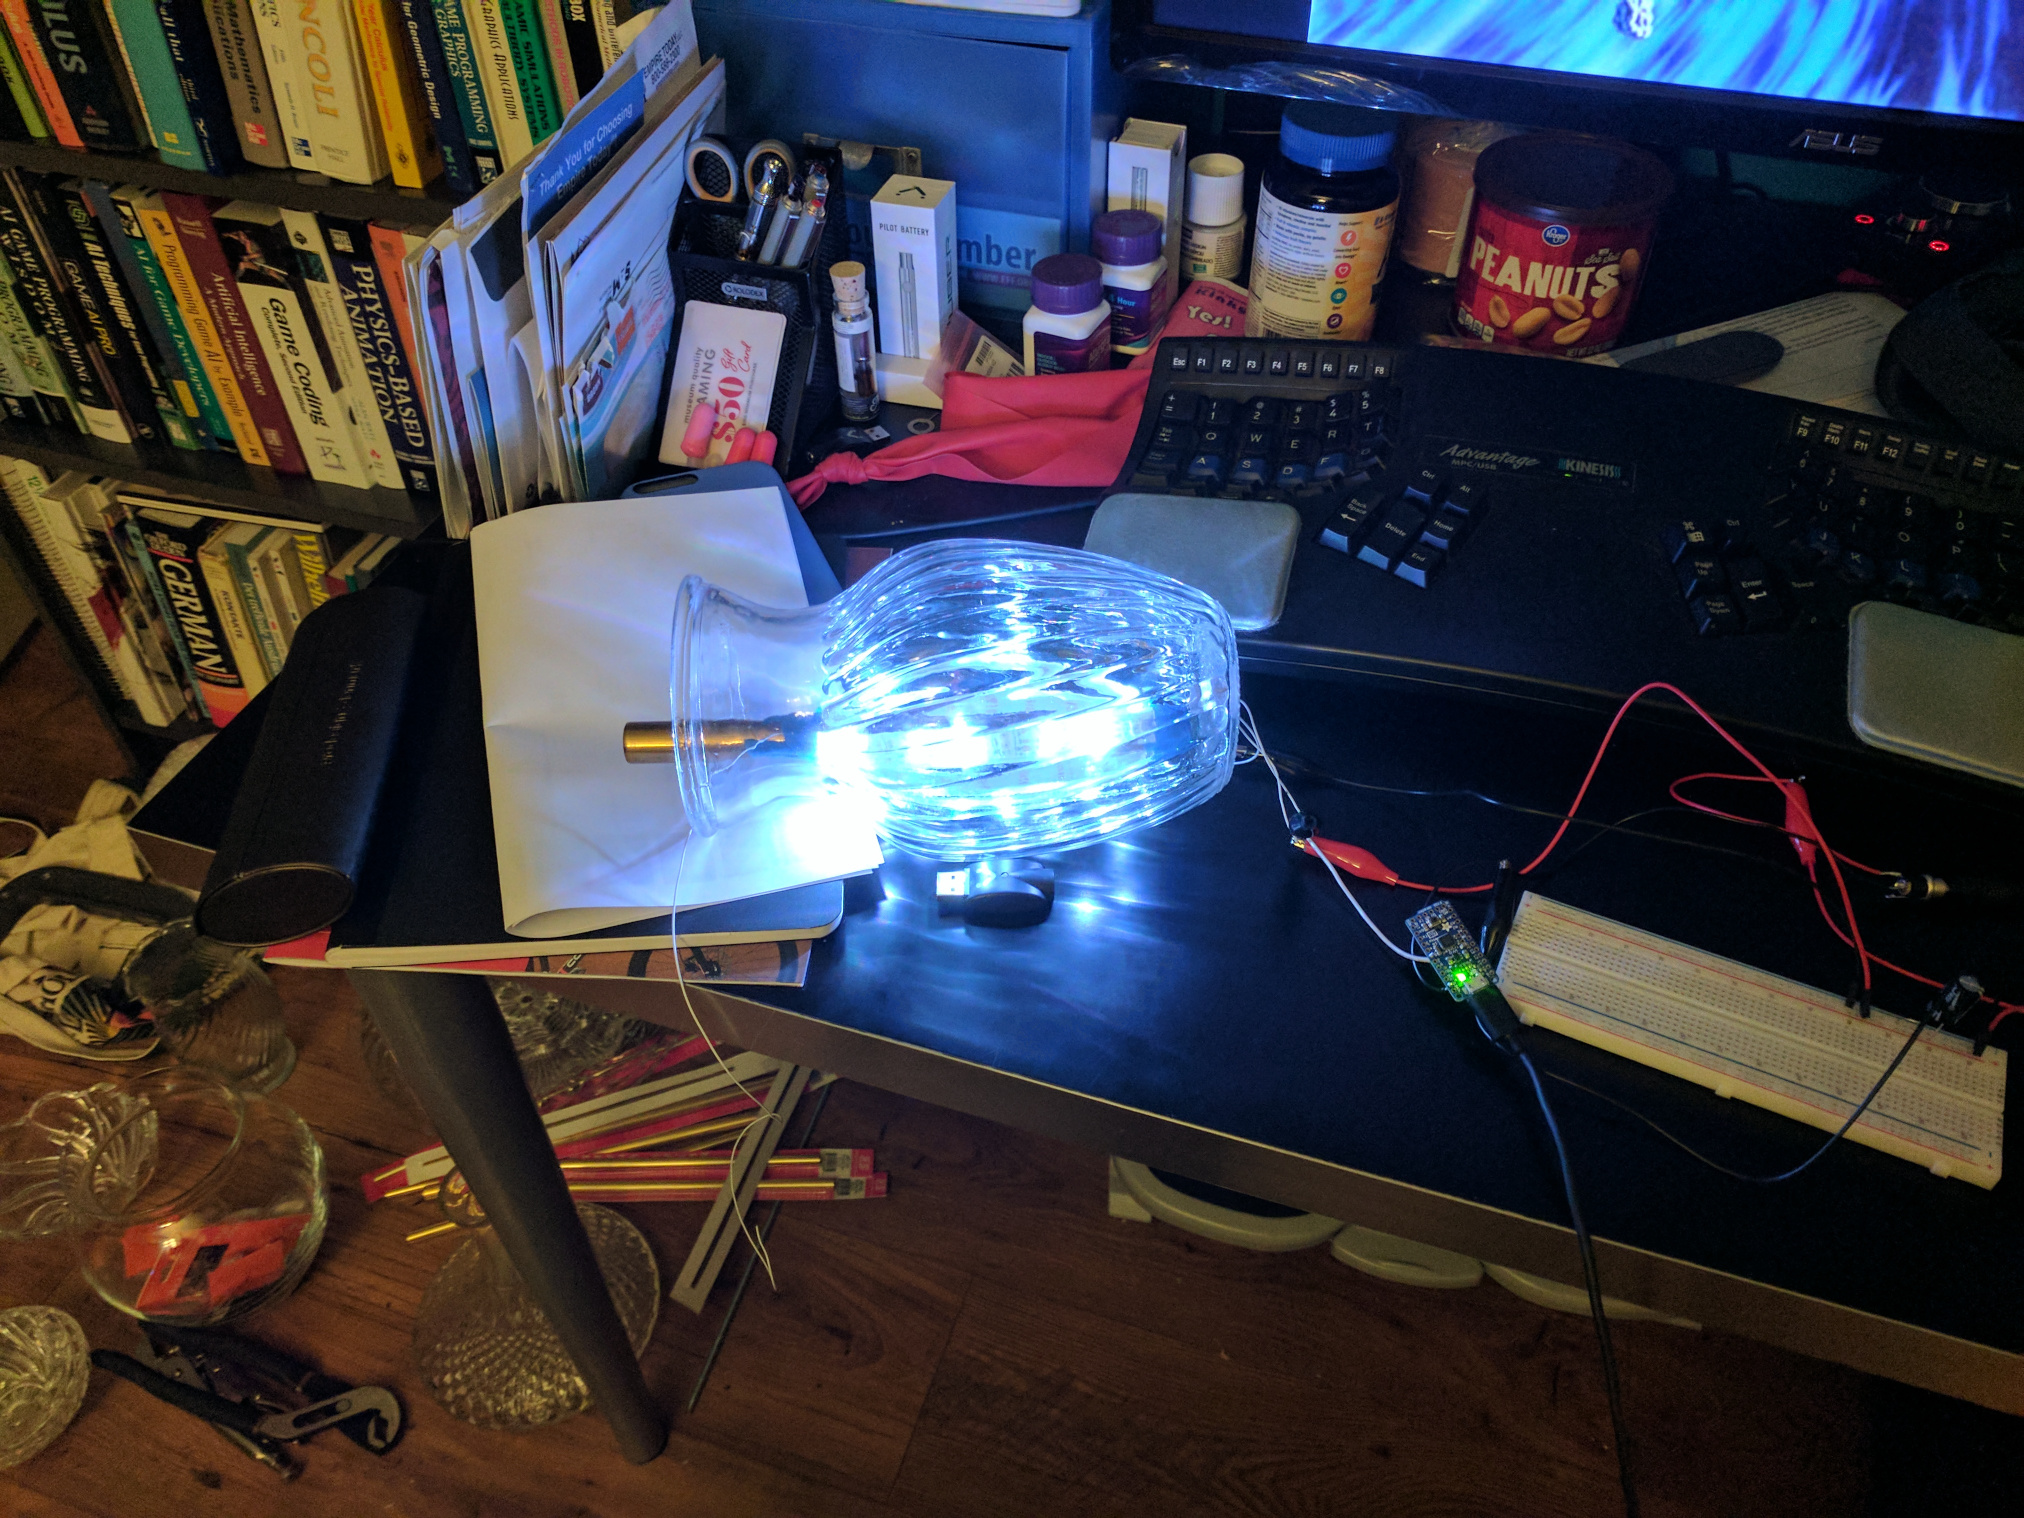 A clear, textured vase with LEDs shining inside, laying on its side on a messy desk with some electronics.